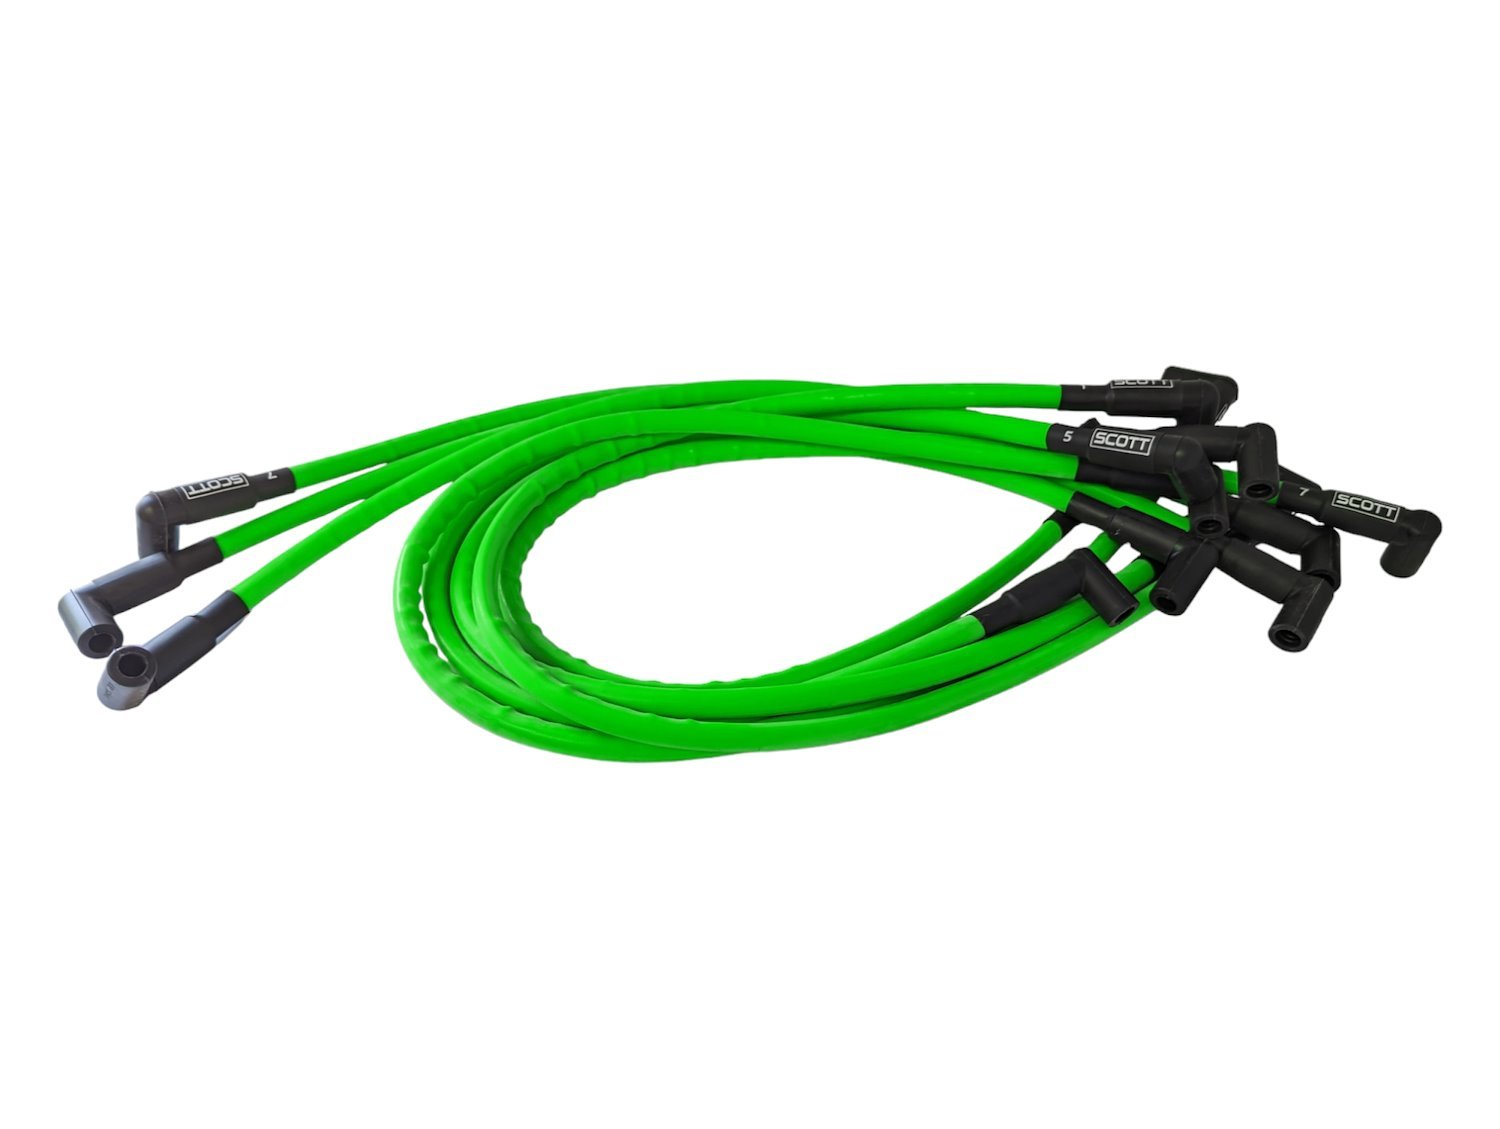 SPW-CH-530-8 High-Performance Silicone-Sleeved Spark Plug Wire Set for Big Block Ford, Under Header [Fluorescent Green]